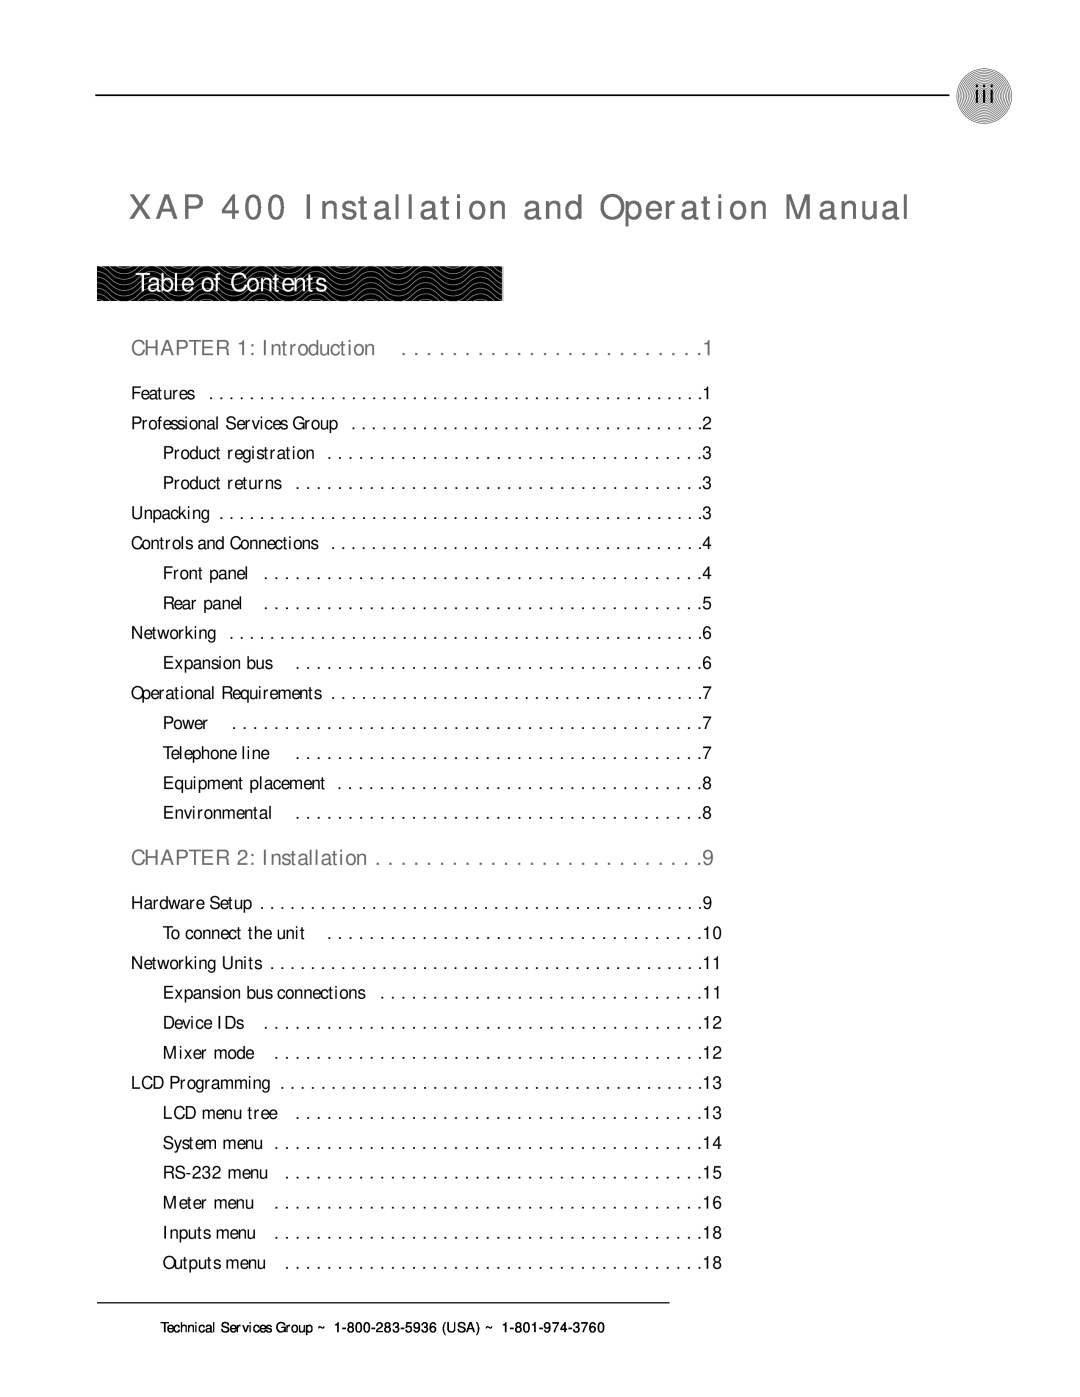 ClearOne comm operation manual Table of Contents, Introduction, XAP 400 Installation and Operation Manual 